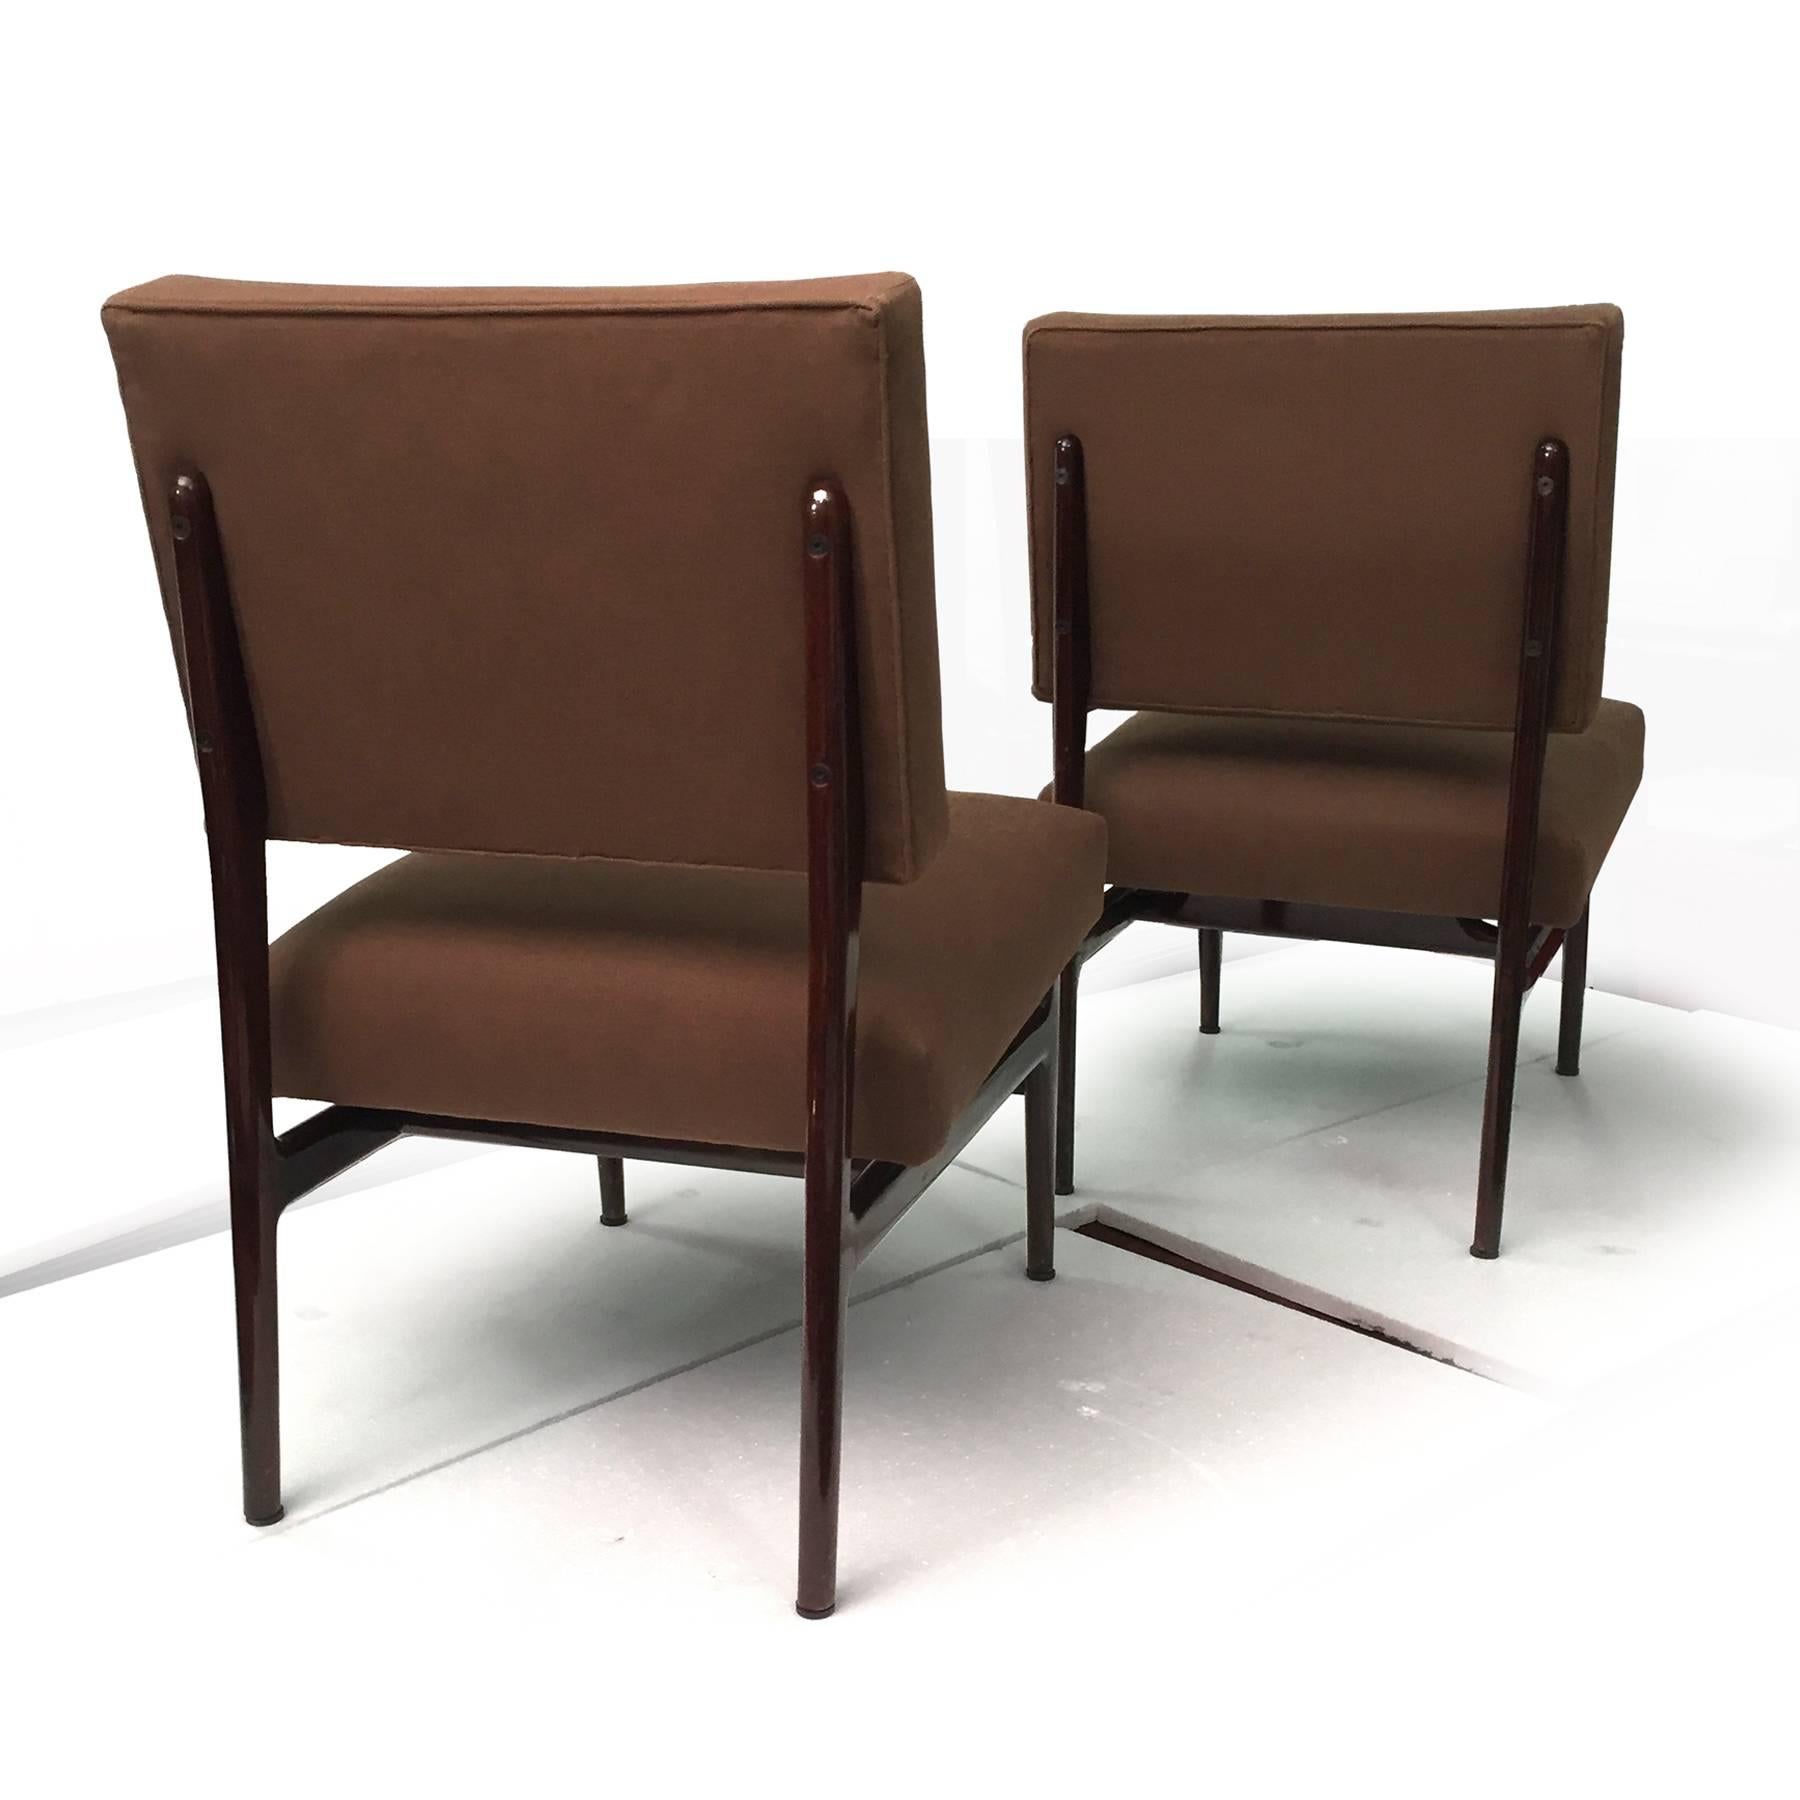 Italian Mid-Century Lounge Chairs by Vittorio Dassi, Set of Two, 1950s In Good Condition For Sale In Traversetolo, IT